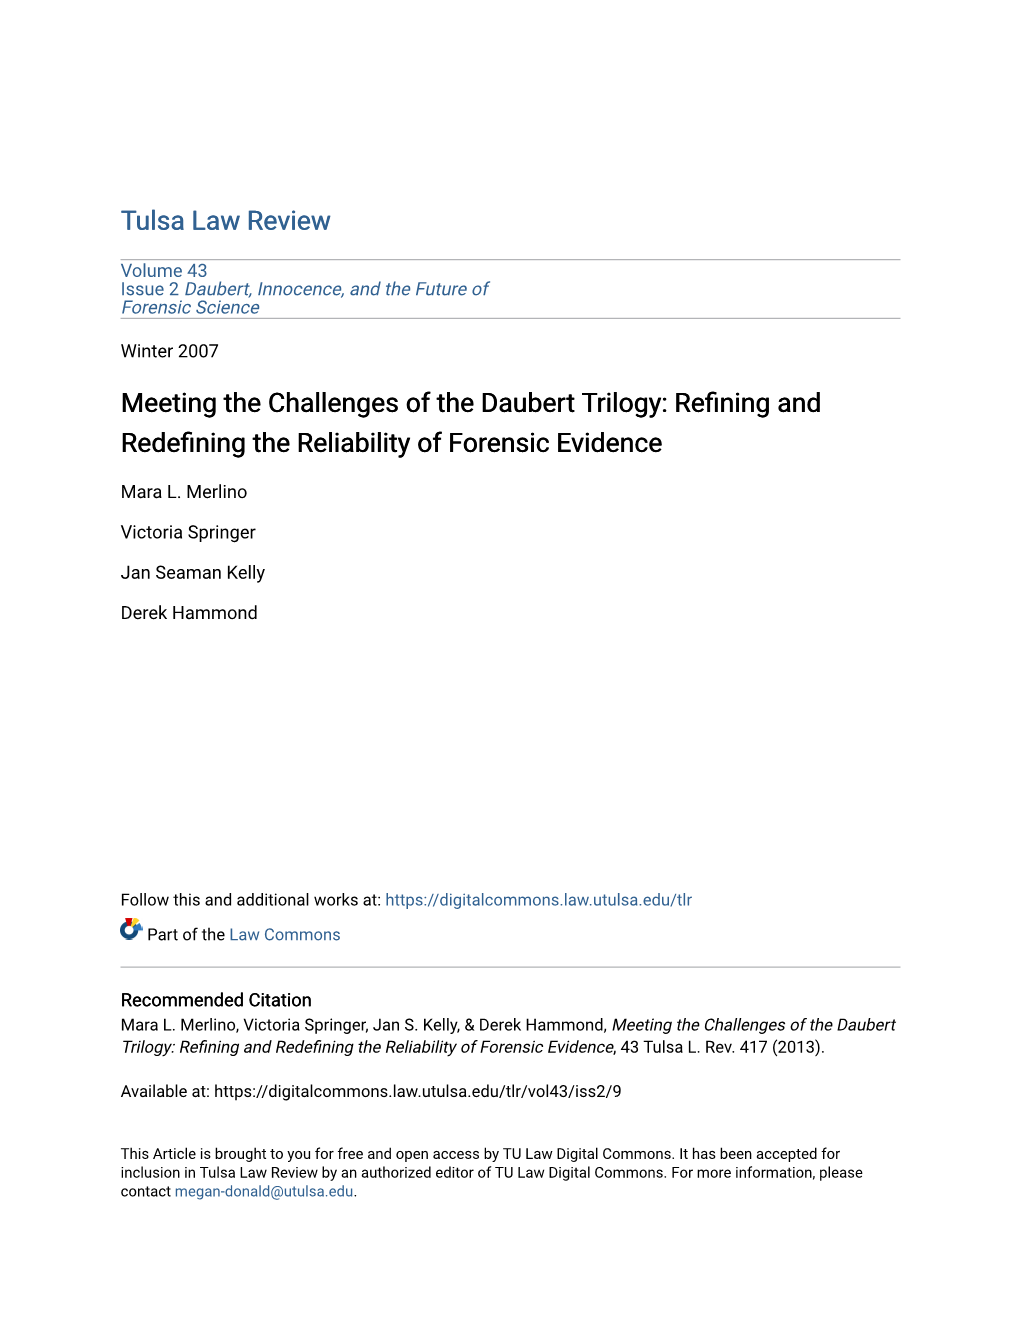 Meeting the Challenges of the Daubert Trilogy: Refining and Redefining the Reliability of Orf Ensic Evidence